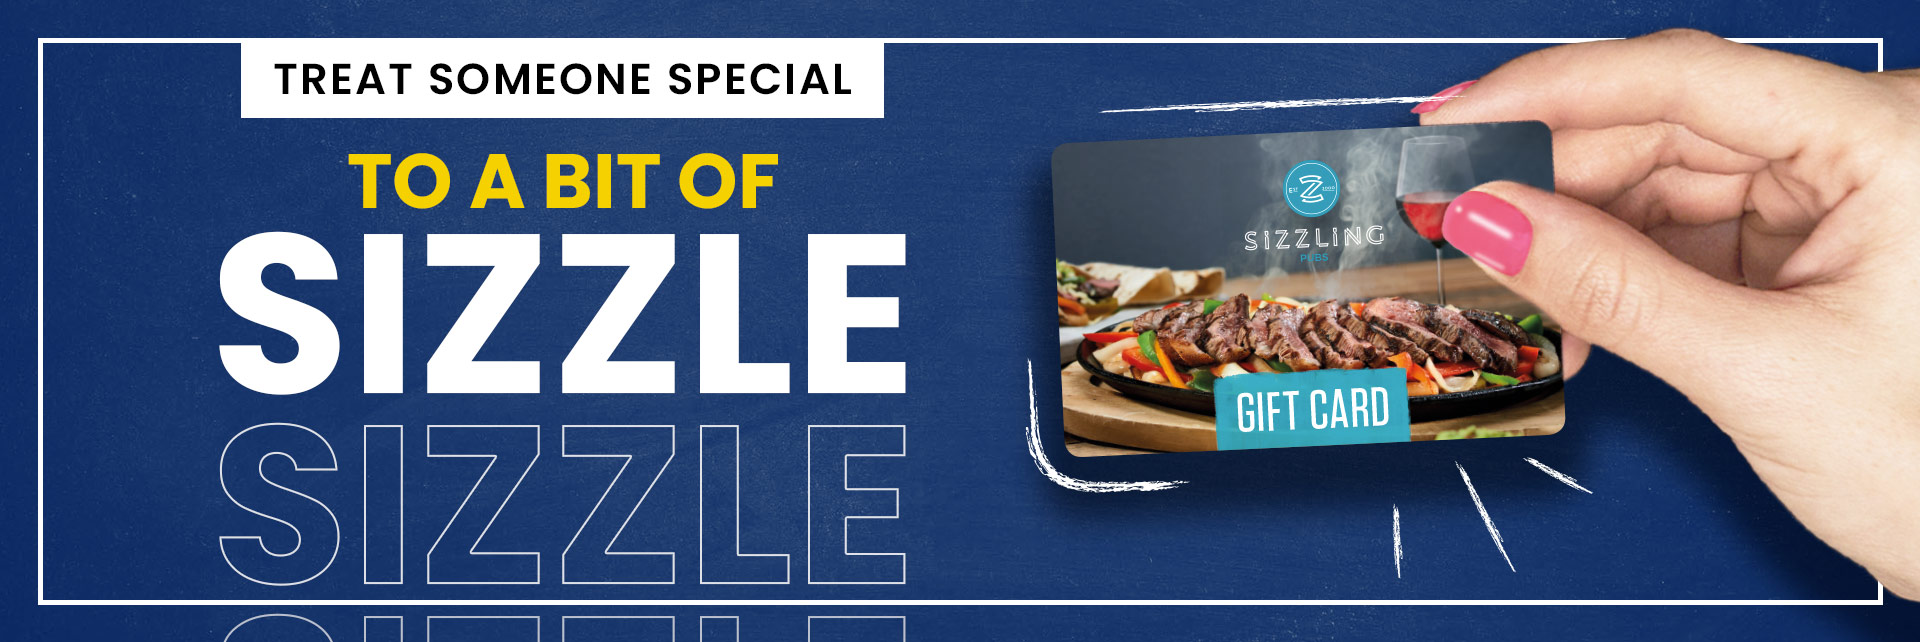 Sizzling Pubs Gift Card at The National in Hull